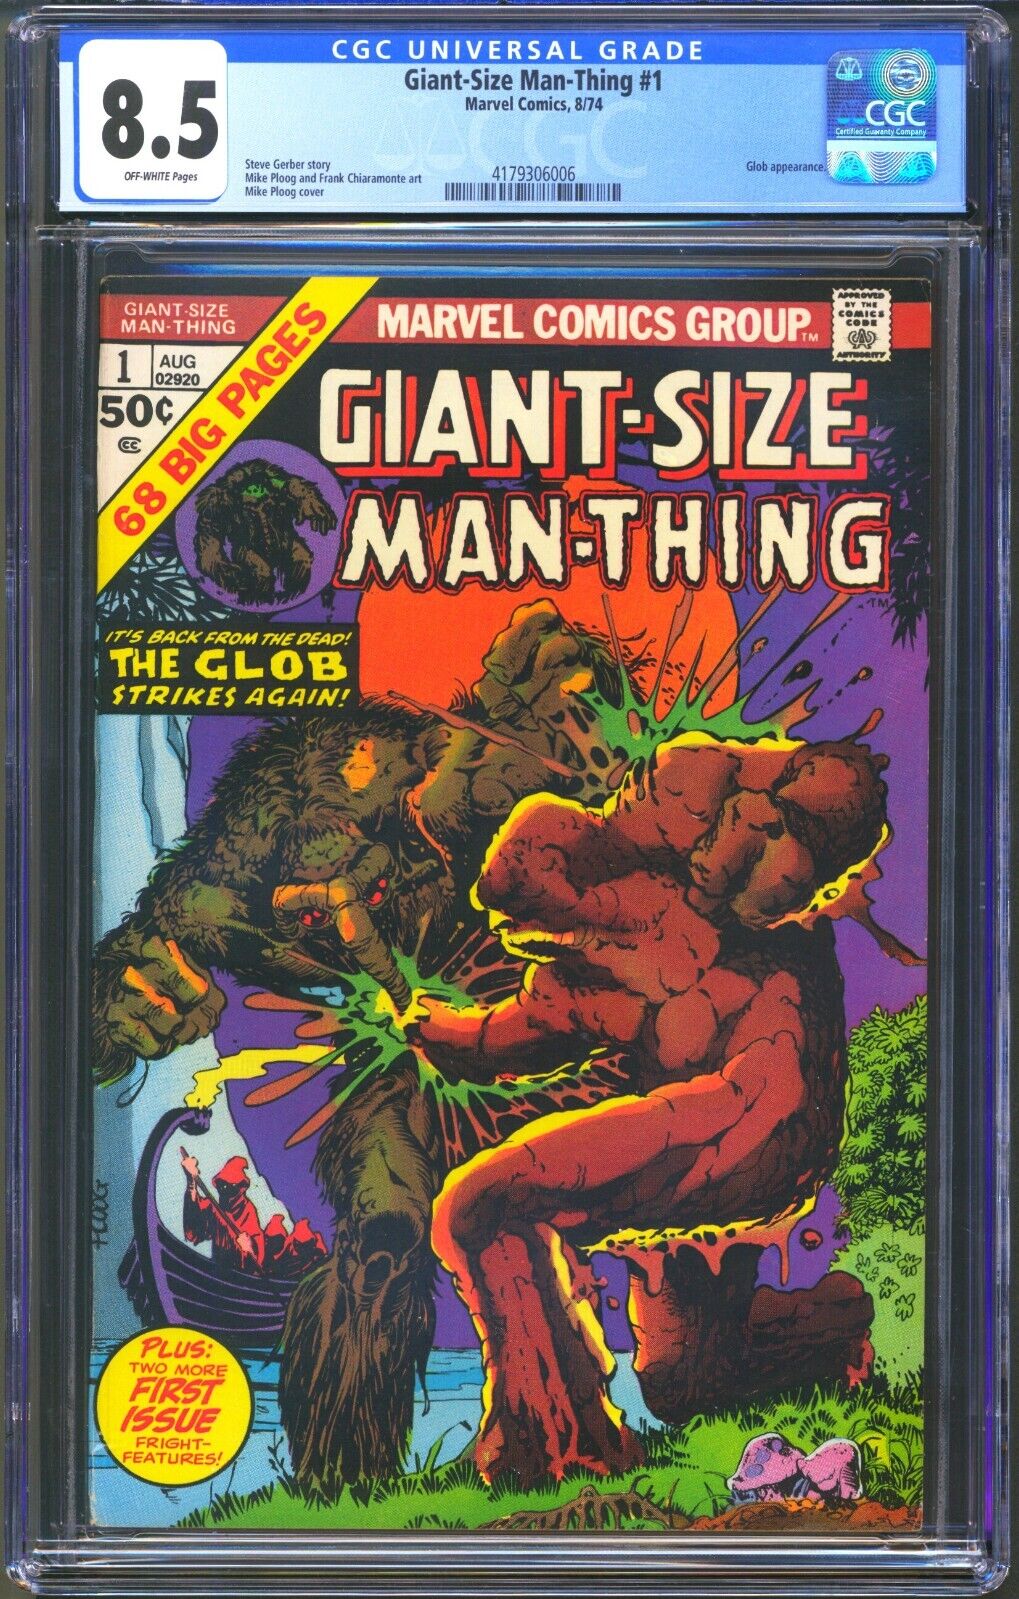 GIANT-SIZE MAN-THING #1 - CGC 8.5 - OWP - VF+ MIKE PLOOG COVER